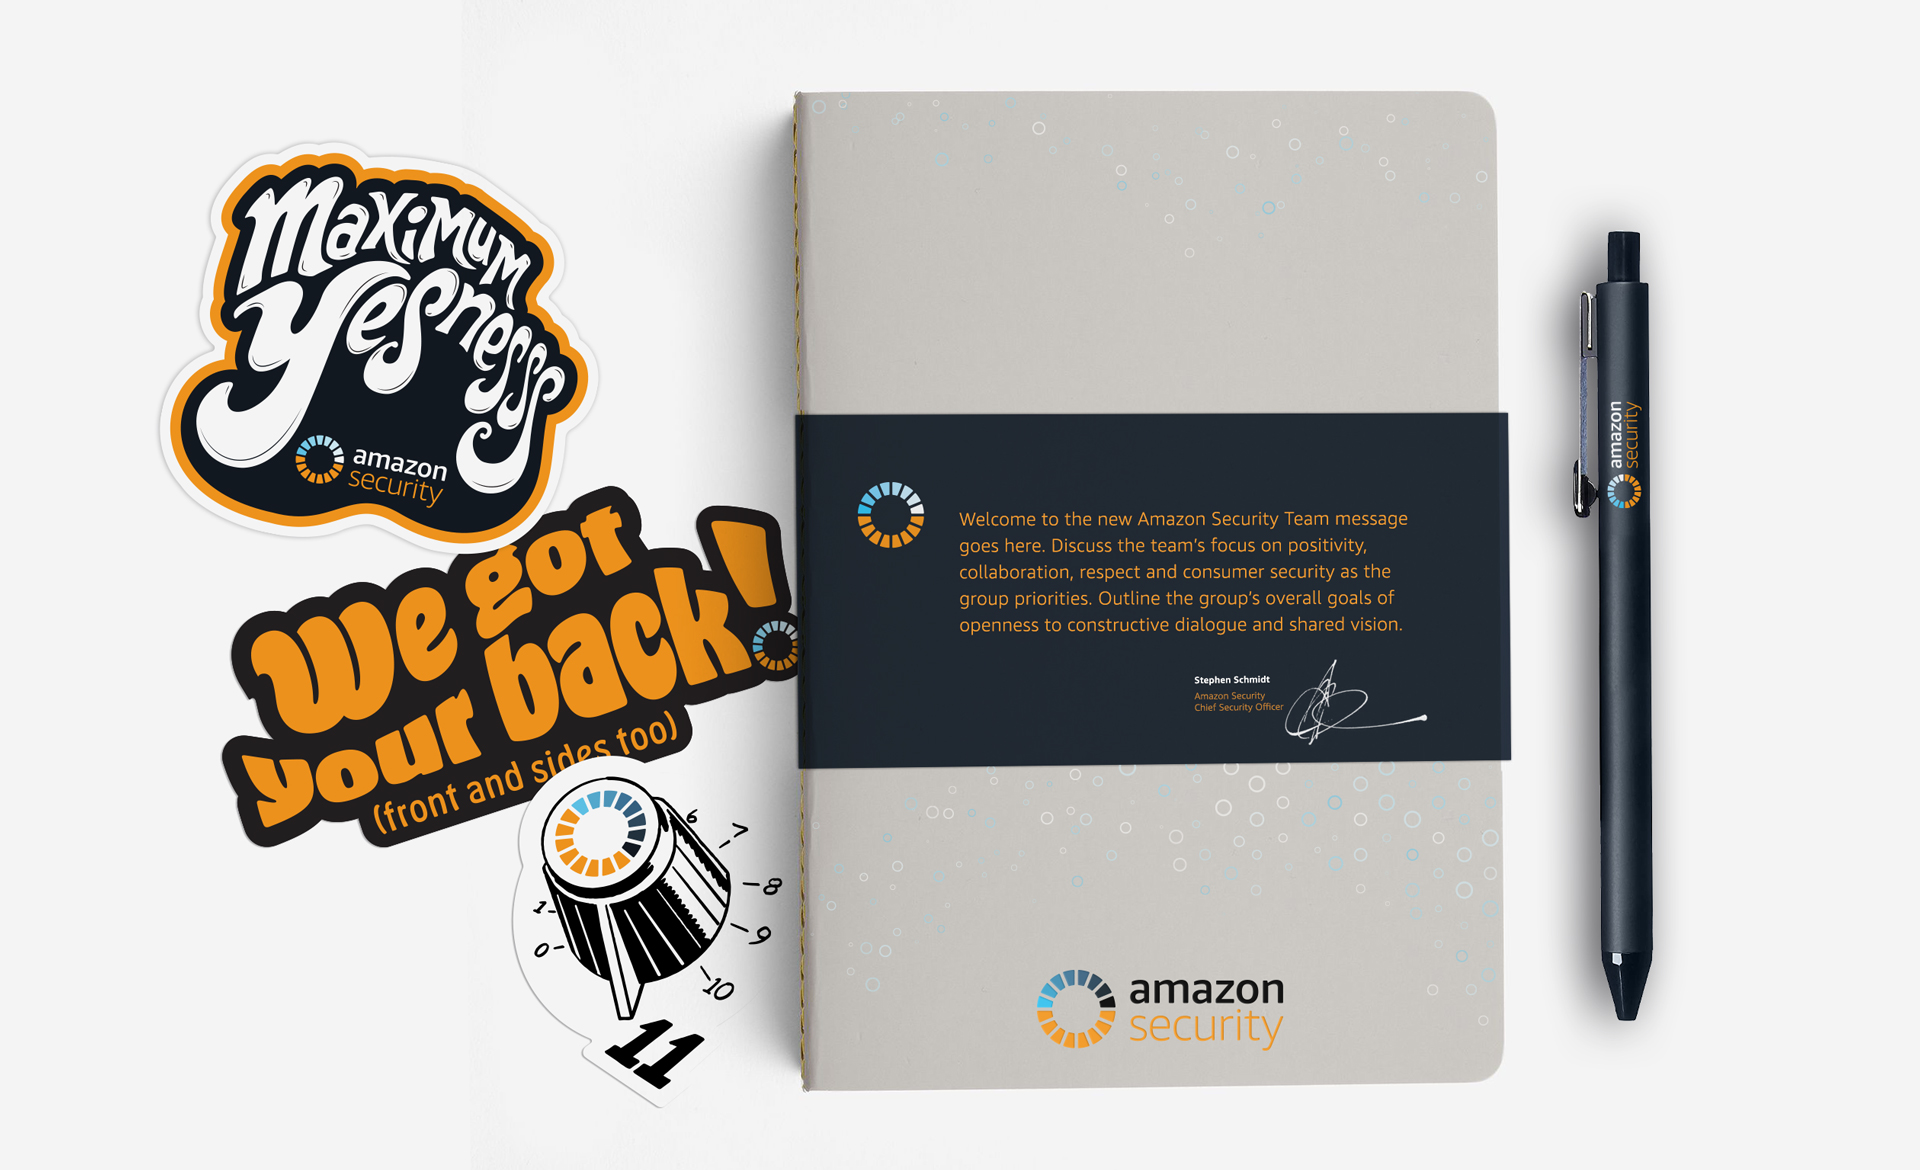 Amazon Security stickers and branded notepad created by Incubate Design for Amazon